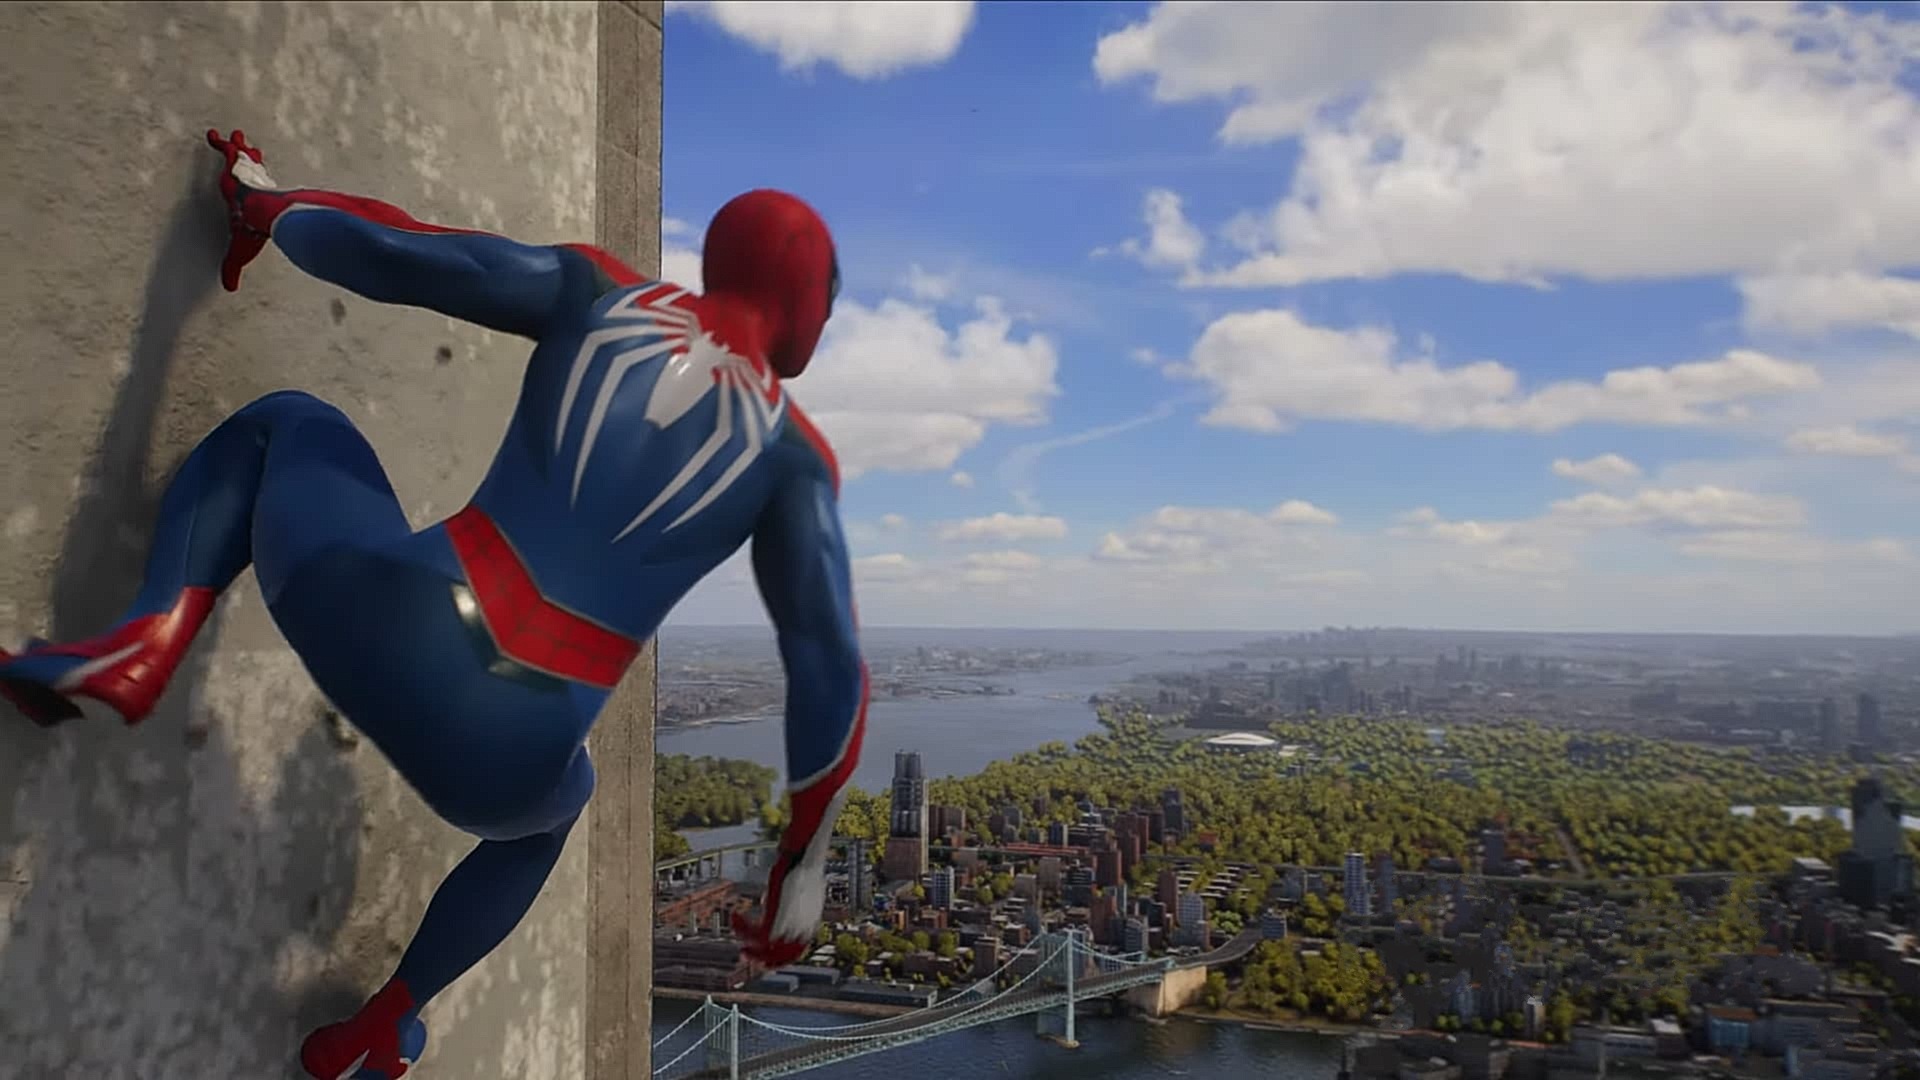 The 10 Best Spider-Man Games Ever Made (According To Metacritic)